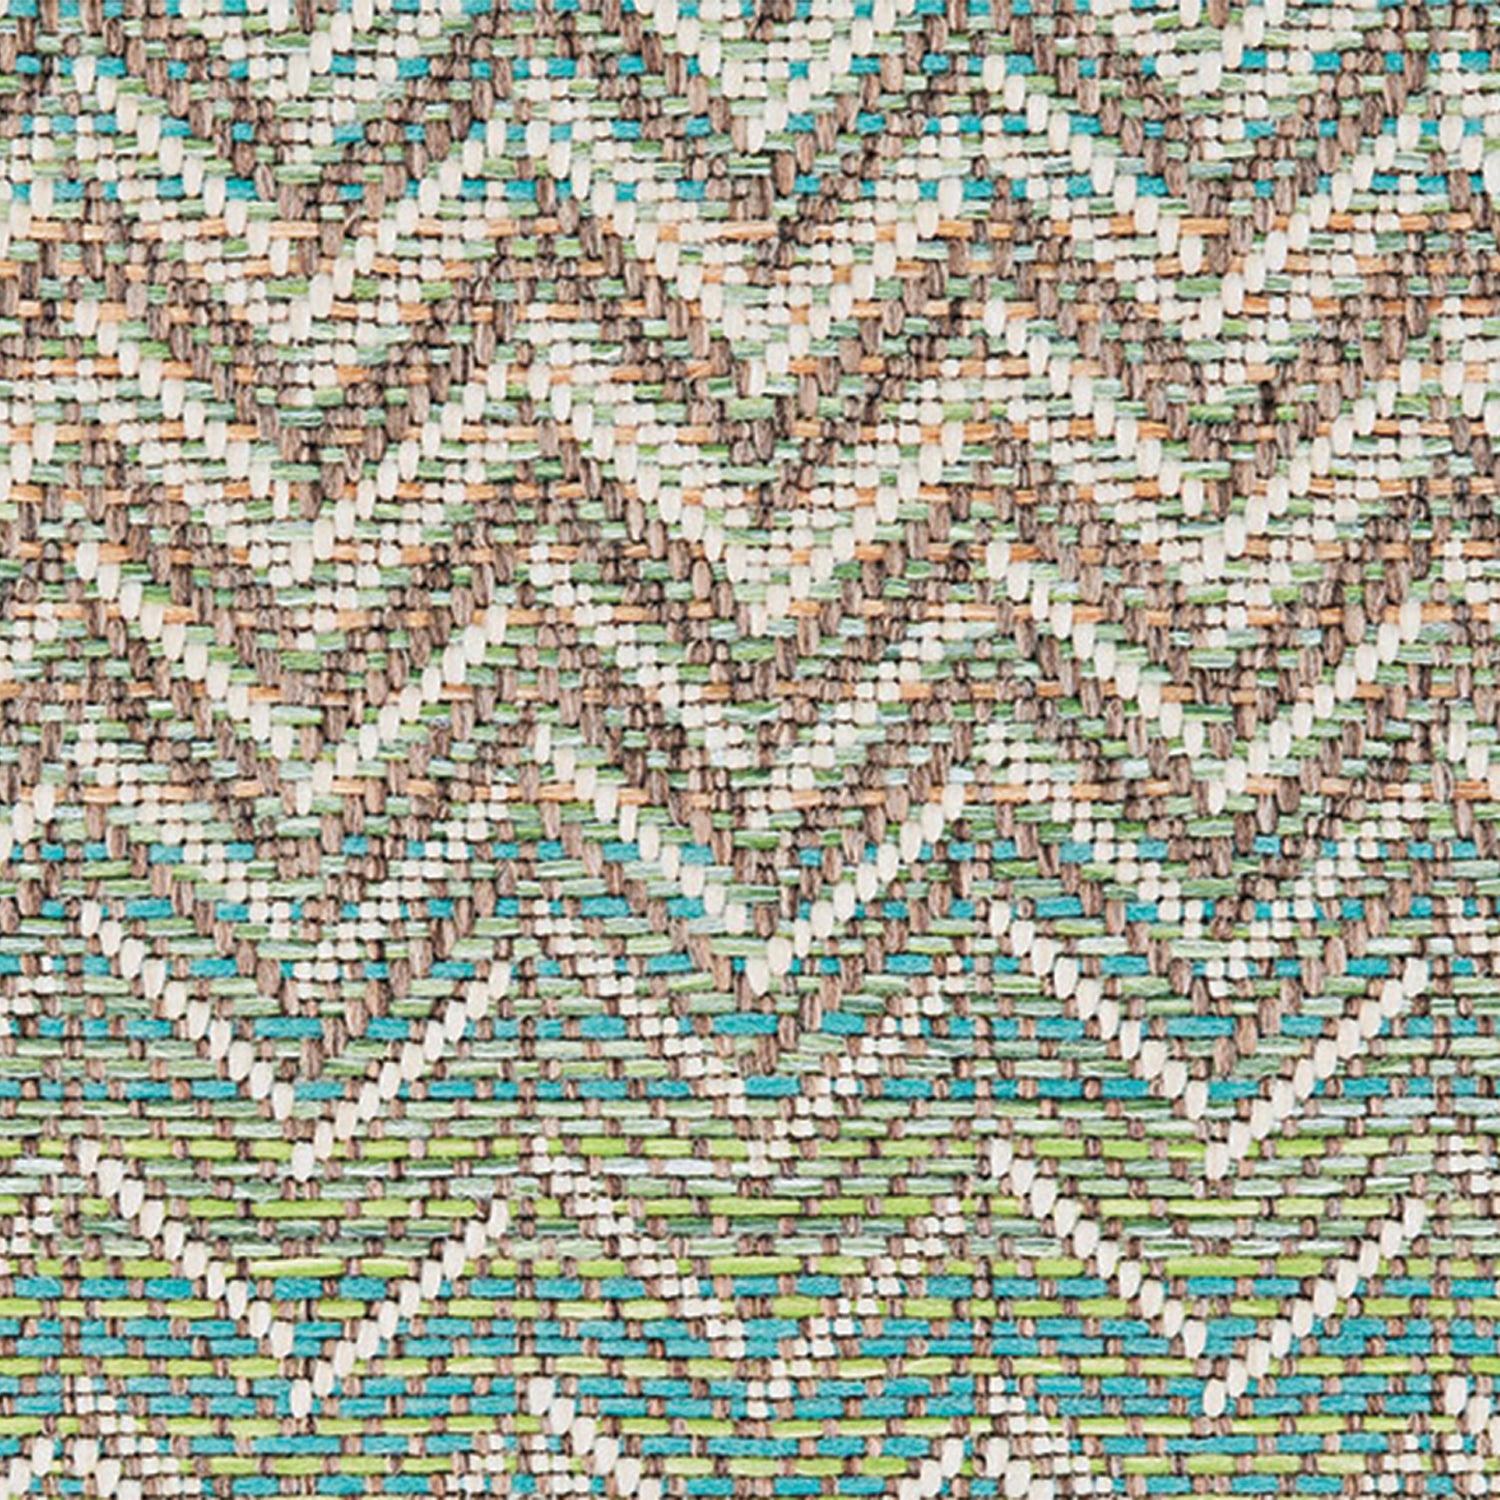 Outdoor broadloom carpet swatch in a striped herringbone weave in light green, turquoise, brown and white.